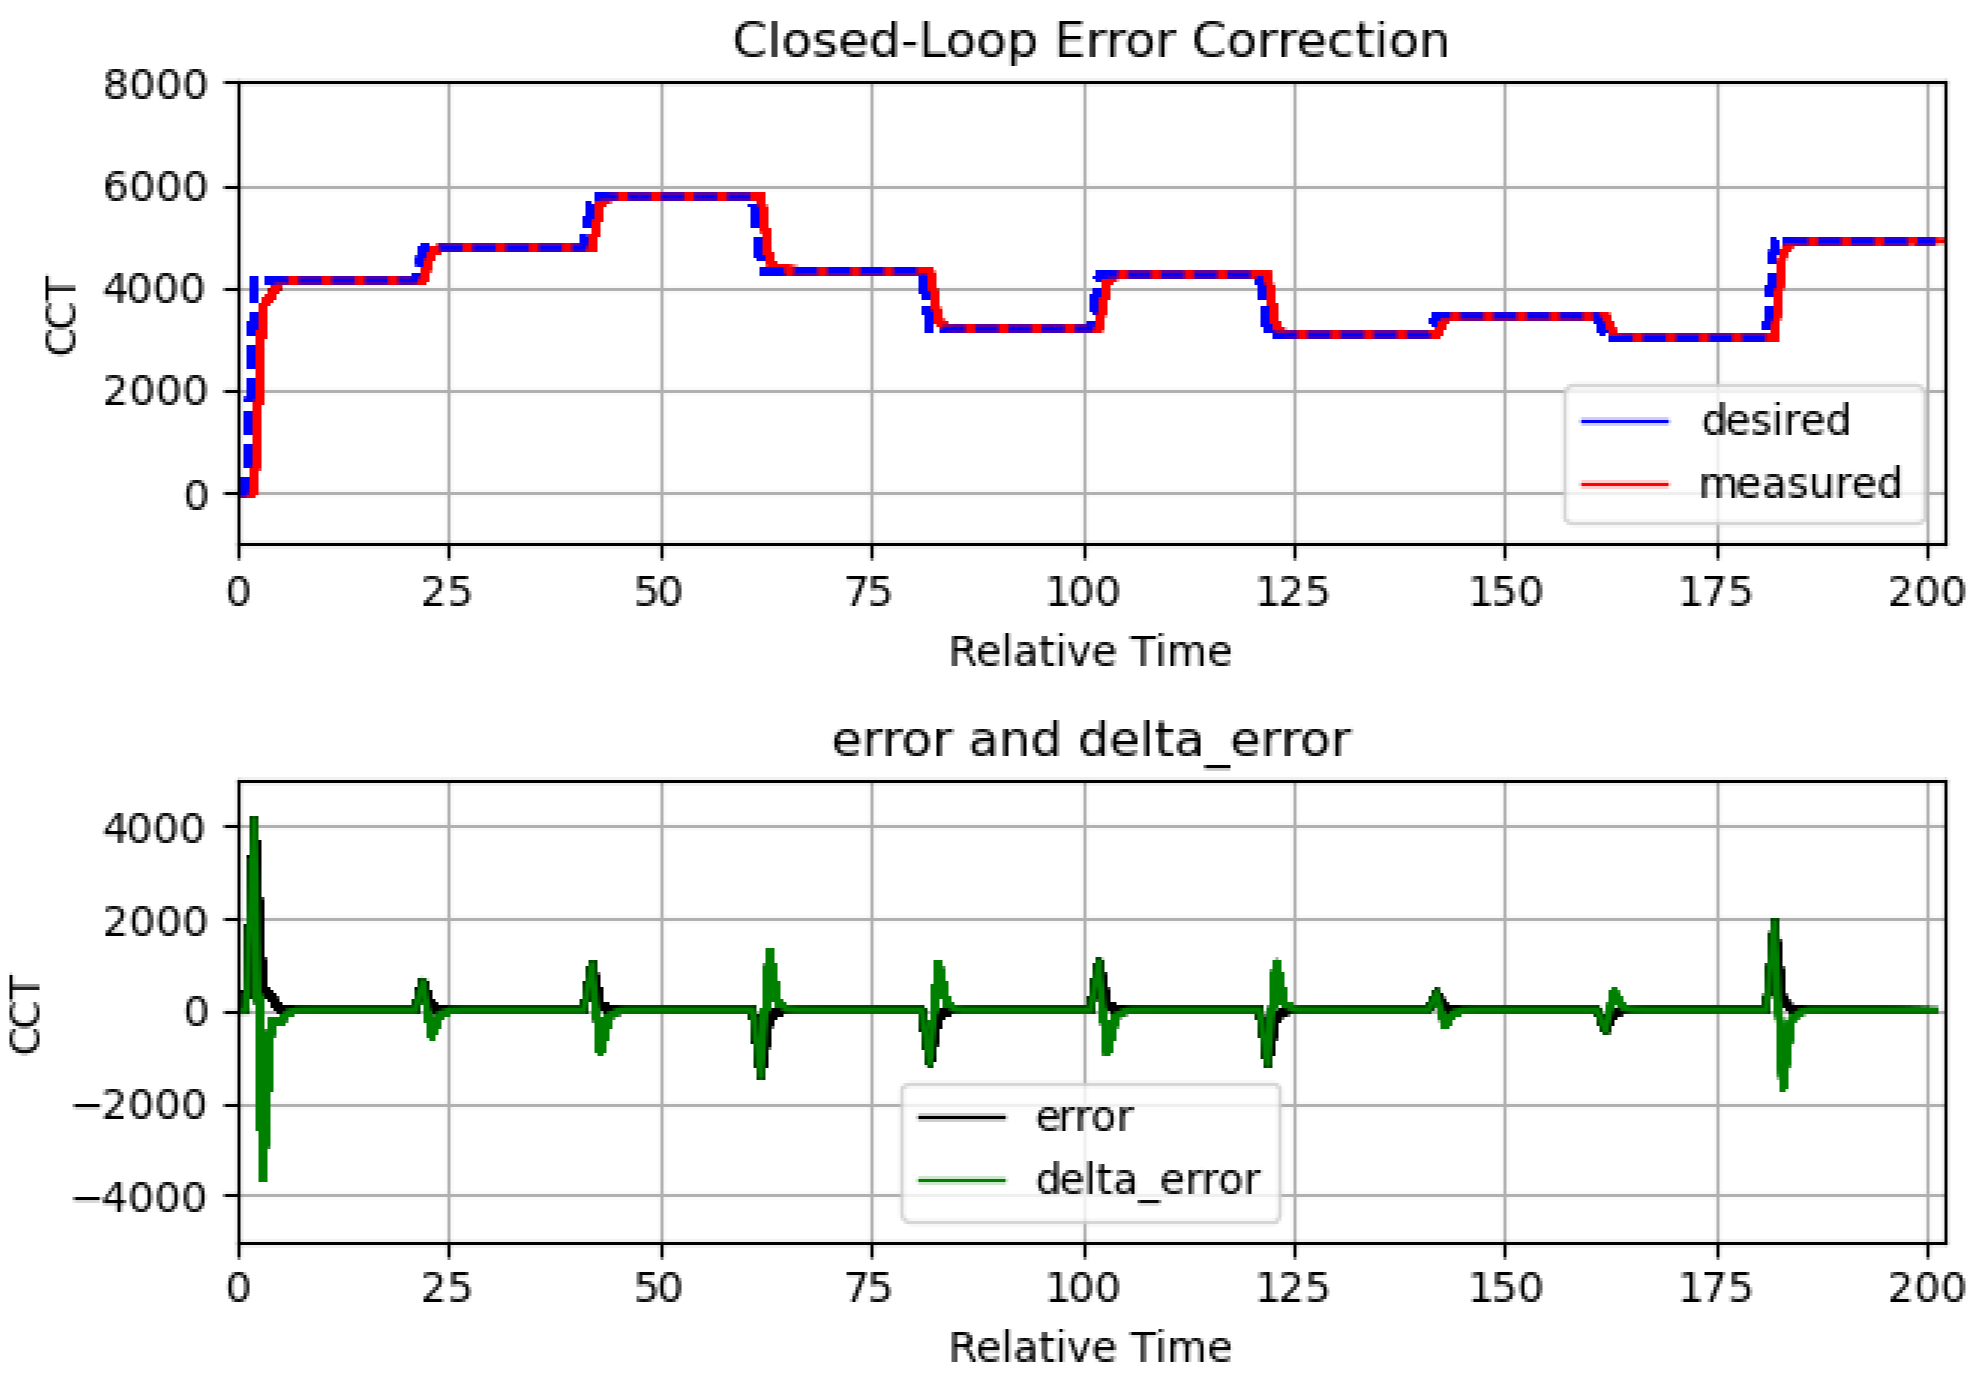 Error Correction in Closed-Loop with multiple targets.